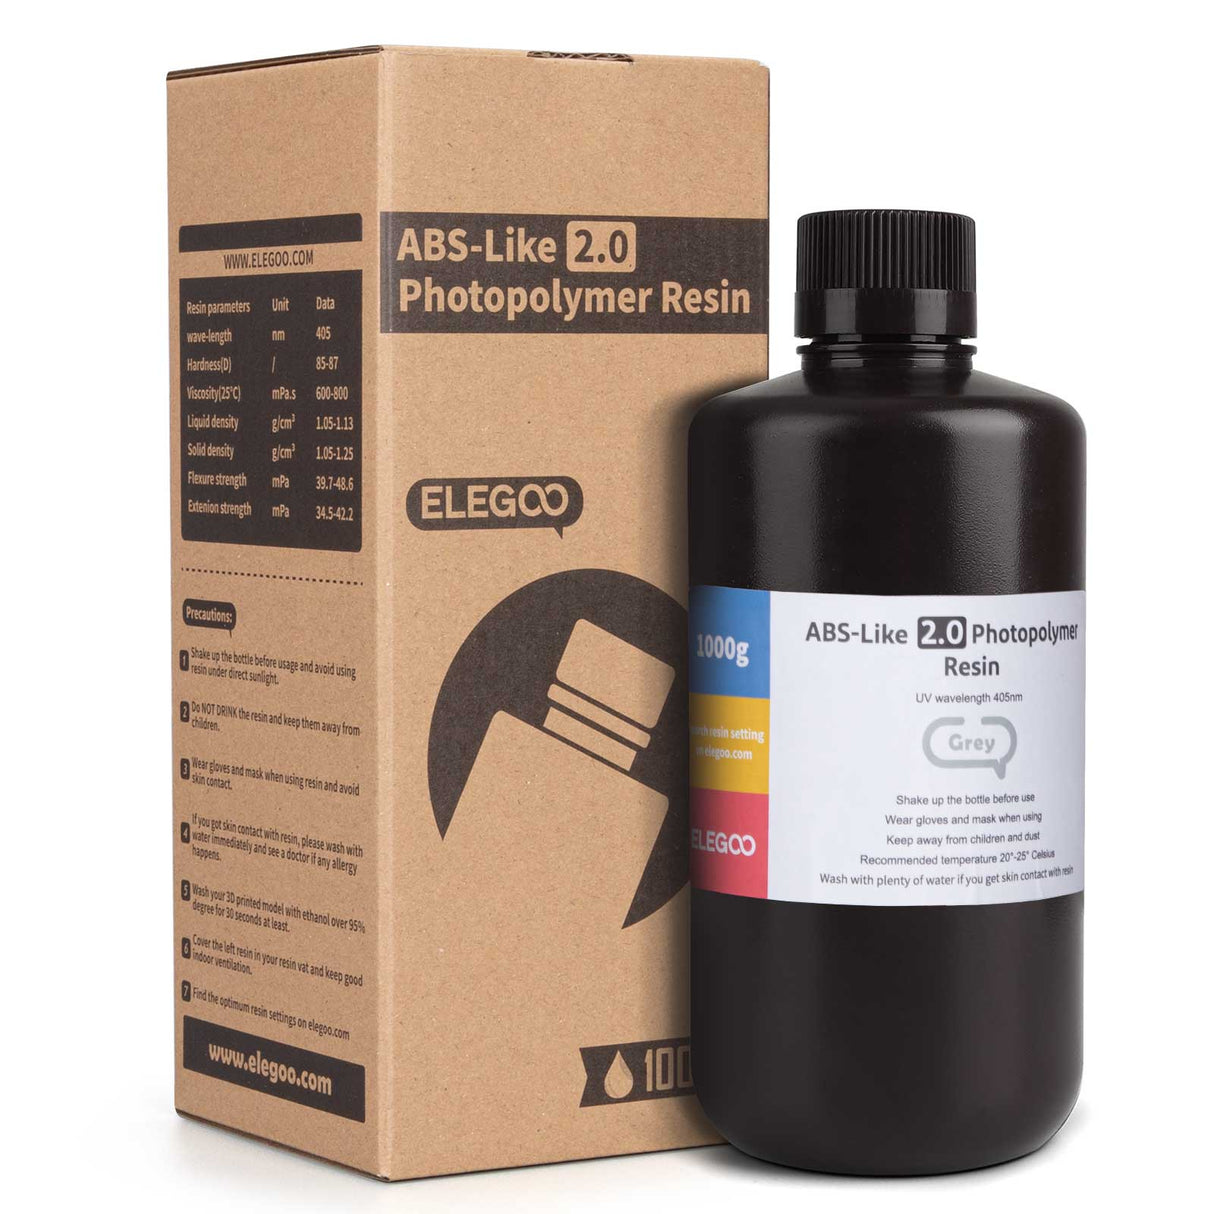 Anycubic ABS-Like Resin Pro 1kg Grey 